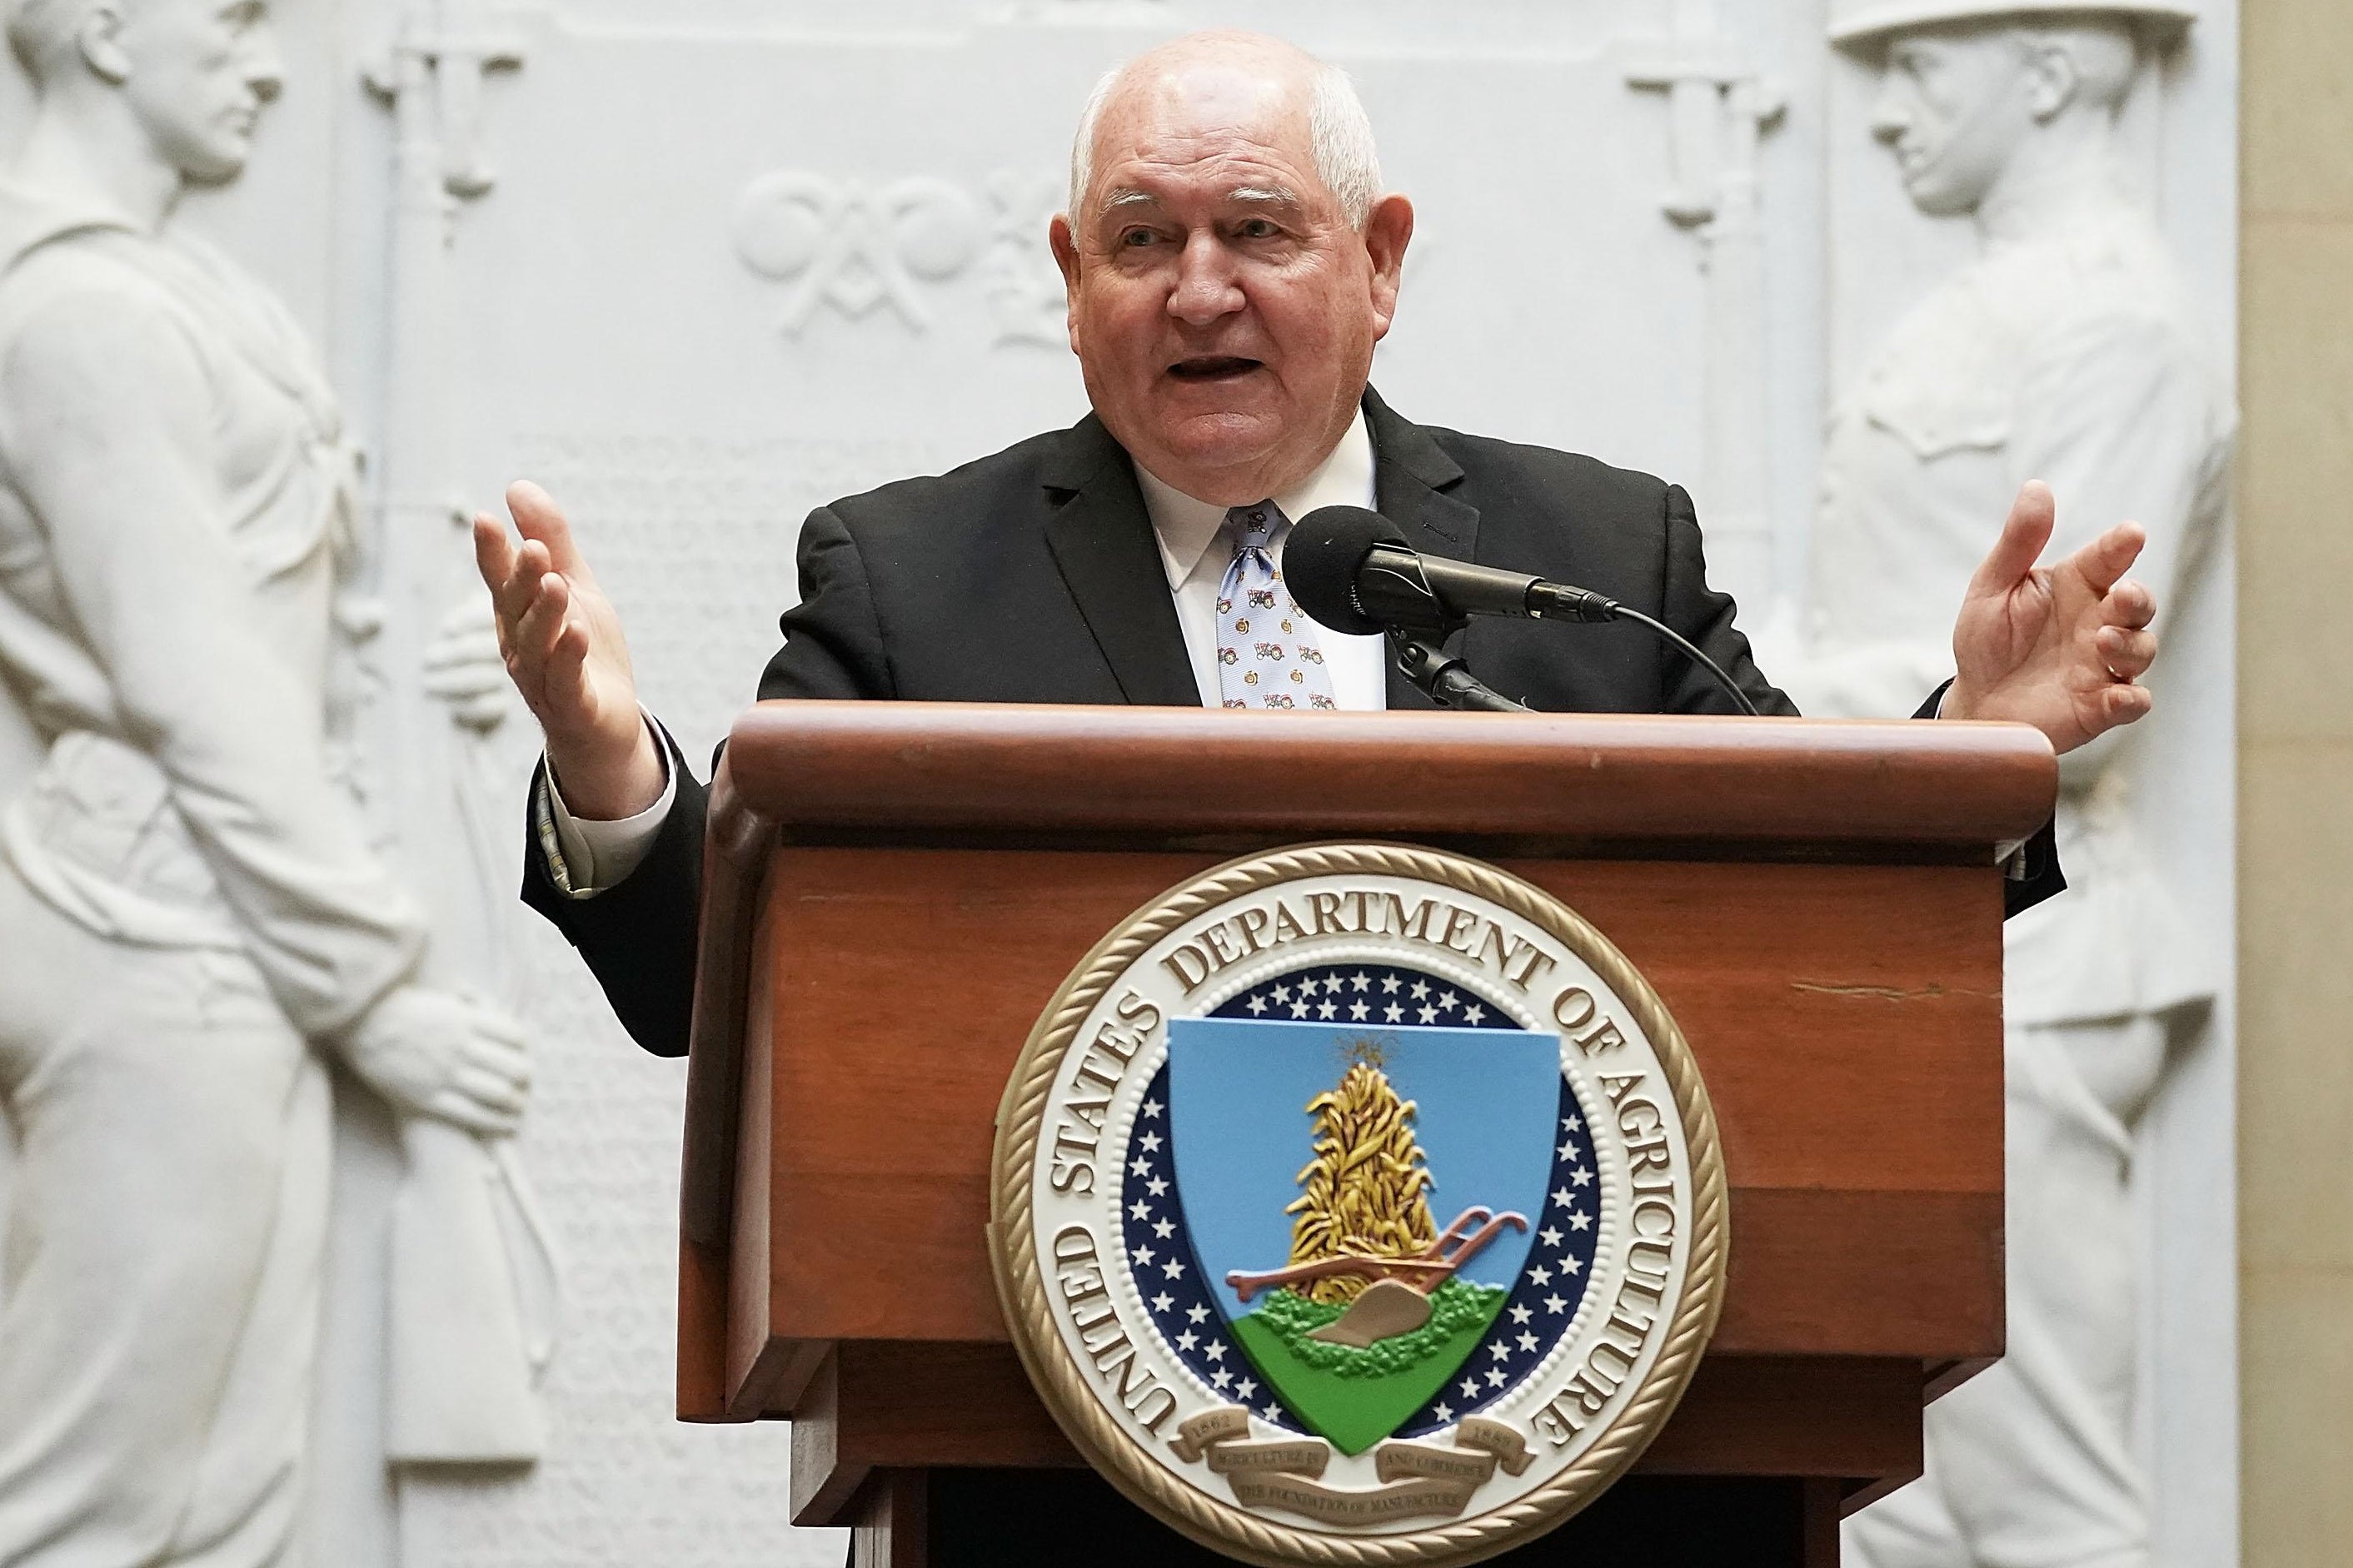 Secretary of Agriculture Sonny Perdue speaks during a forum April 18, 2018 in Washington, D.C. 